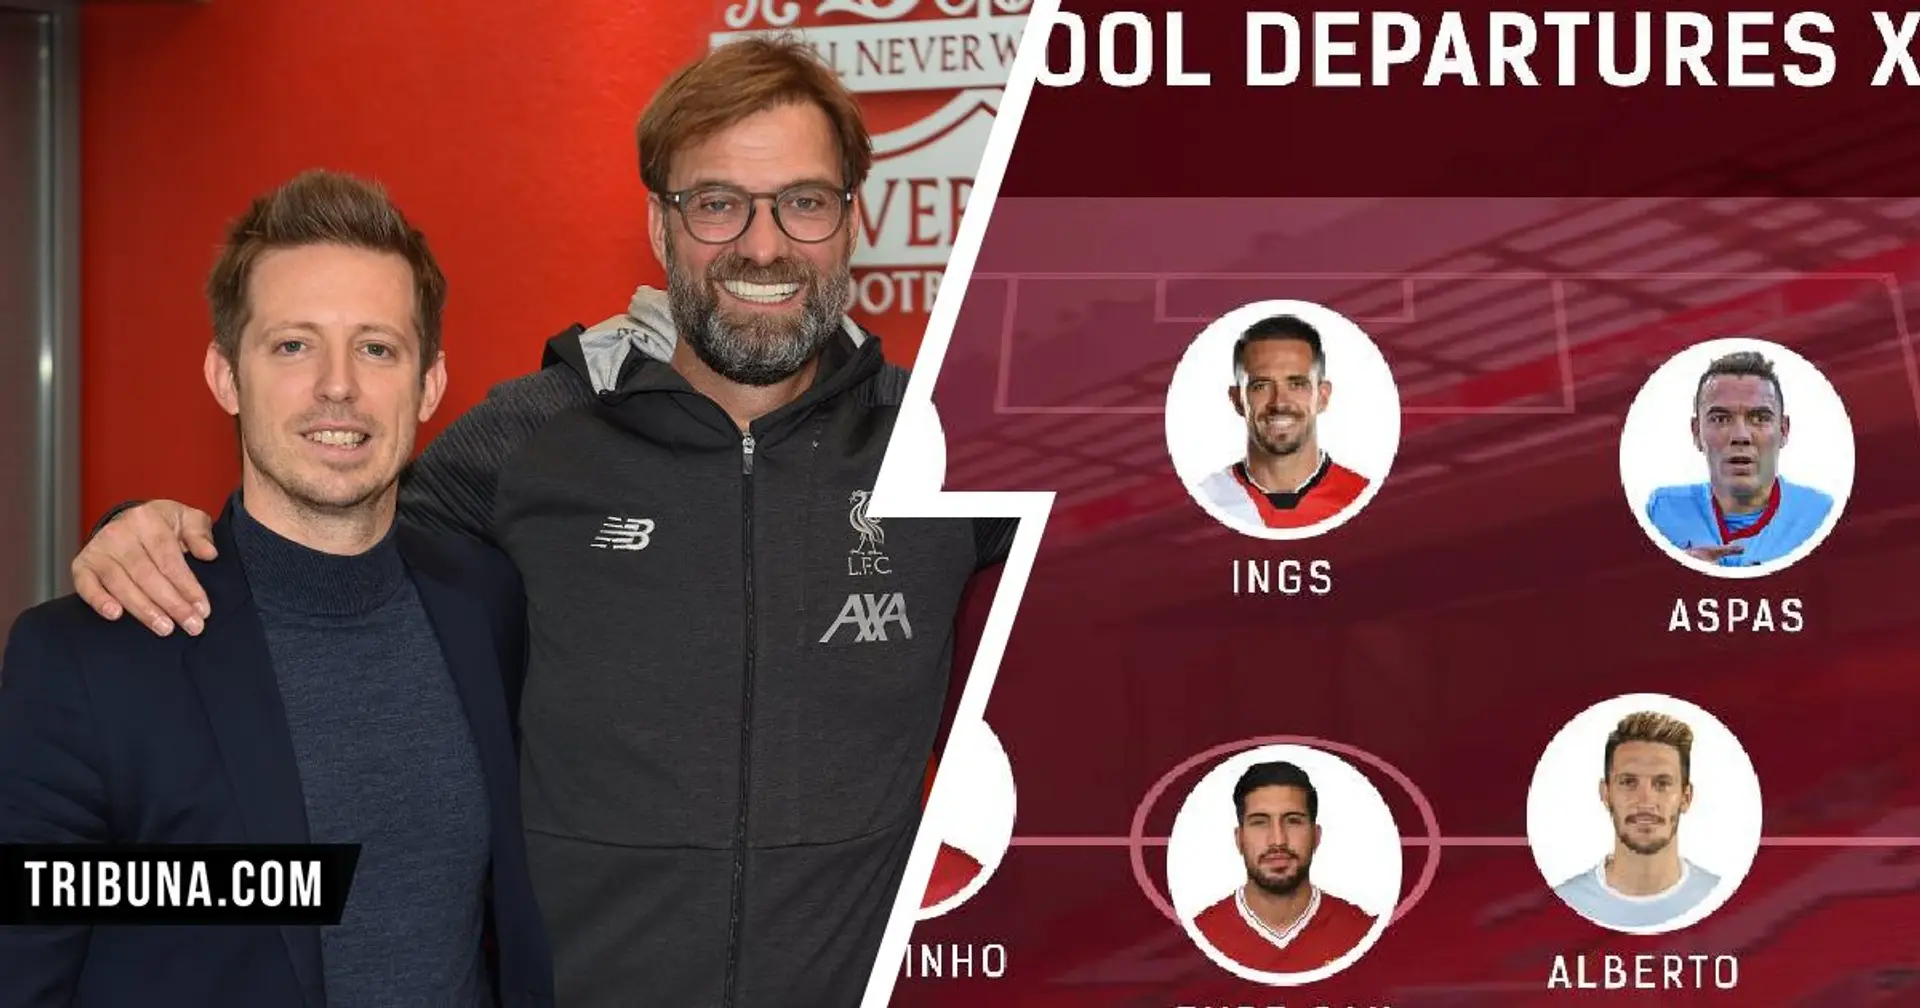 Coutinho, Ings & more: What Liverpool XI based solely on departures from last 5 years would look like